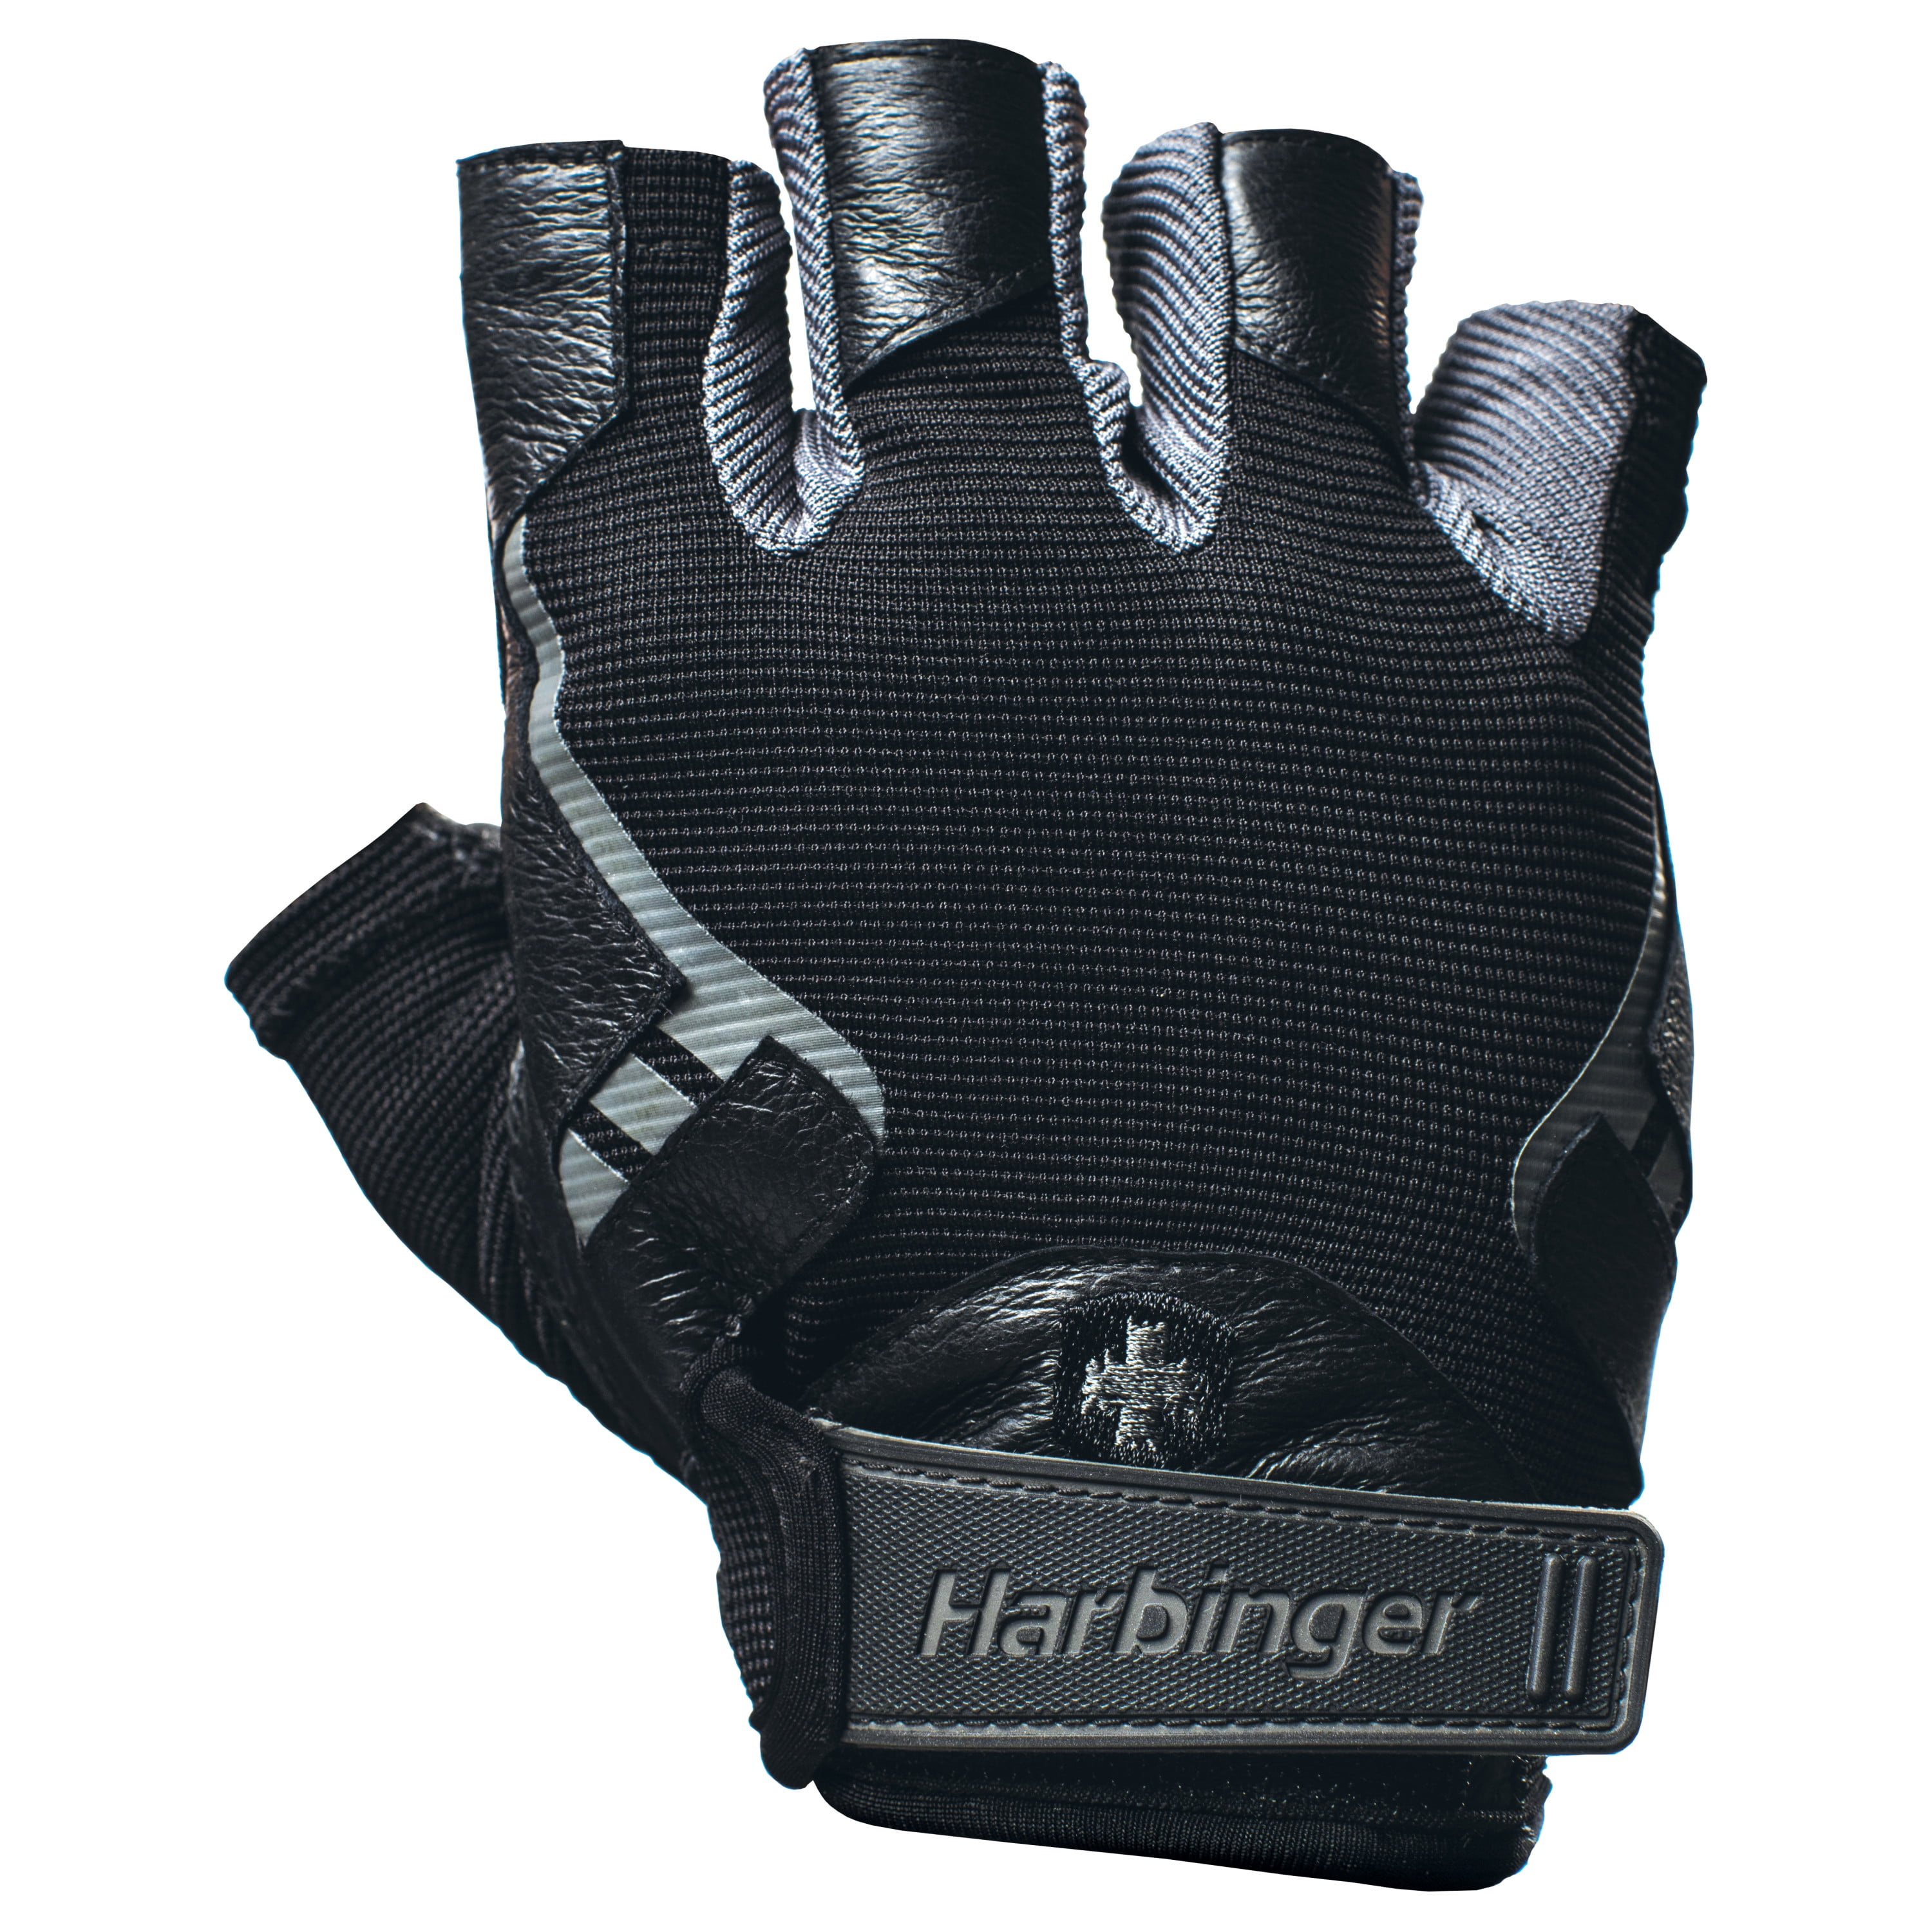 Harbinger Pro Weightlifting Gloves Vented Palm (Pair), Small - Walmart.com